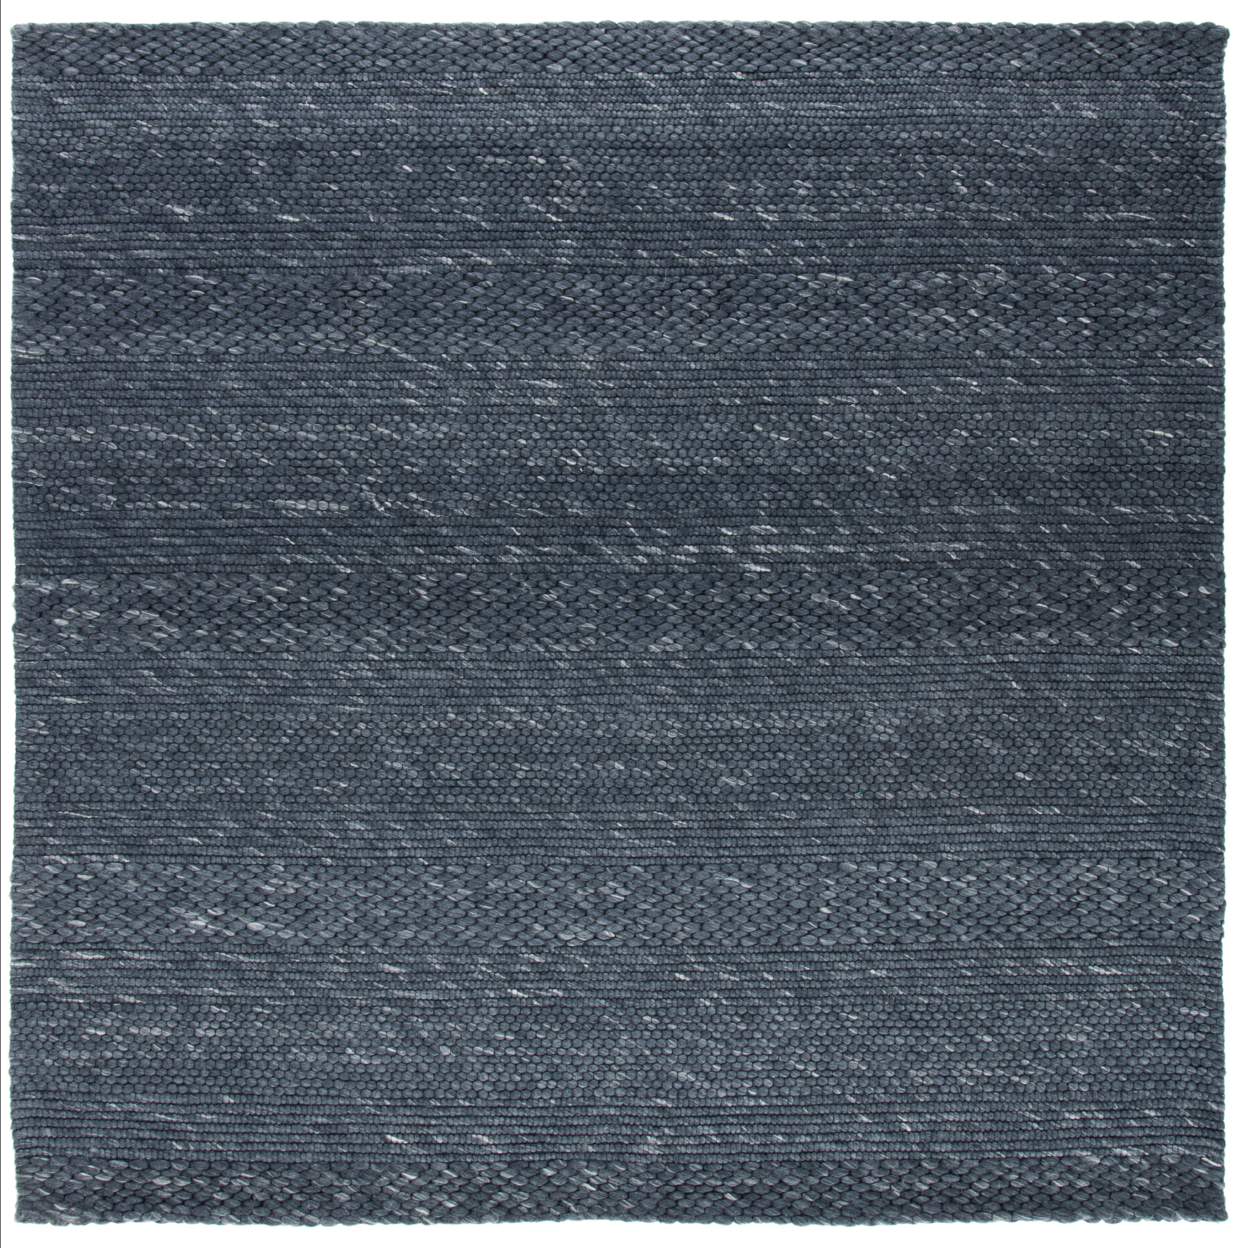 SAFAVIEH Marbella Collection MRB556H Charcoal Rug - 7' Square